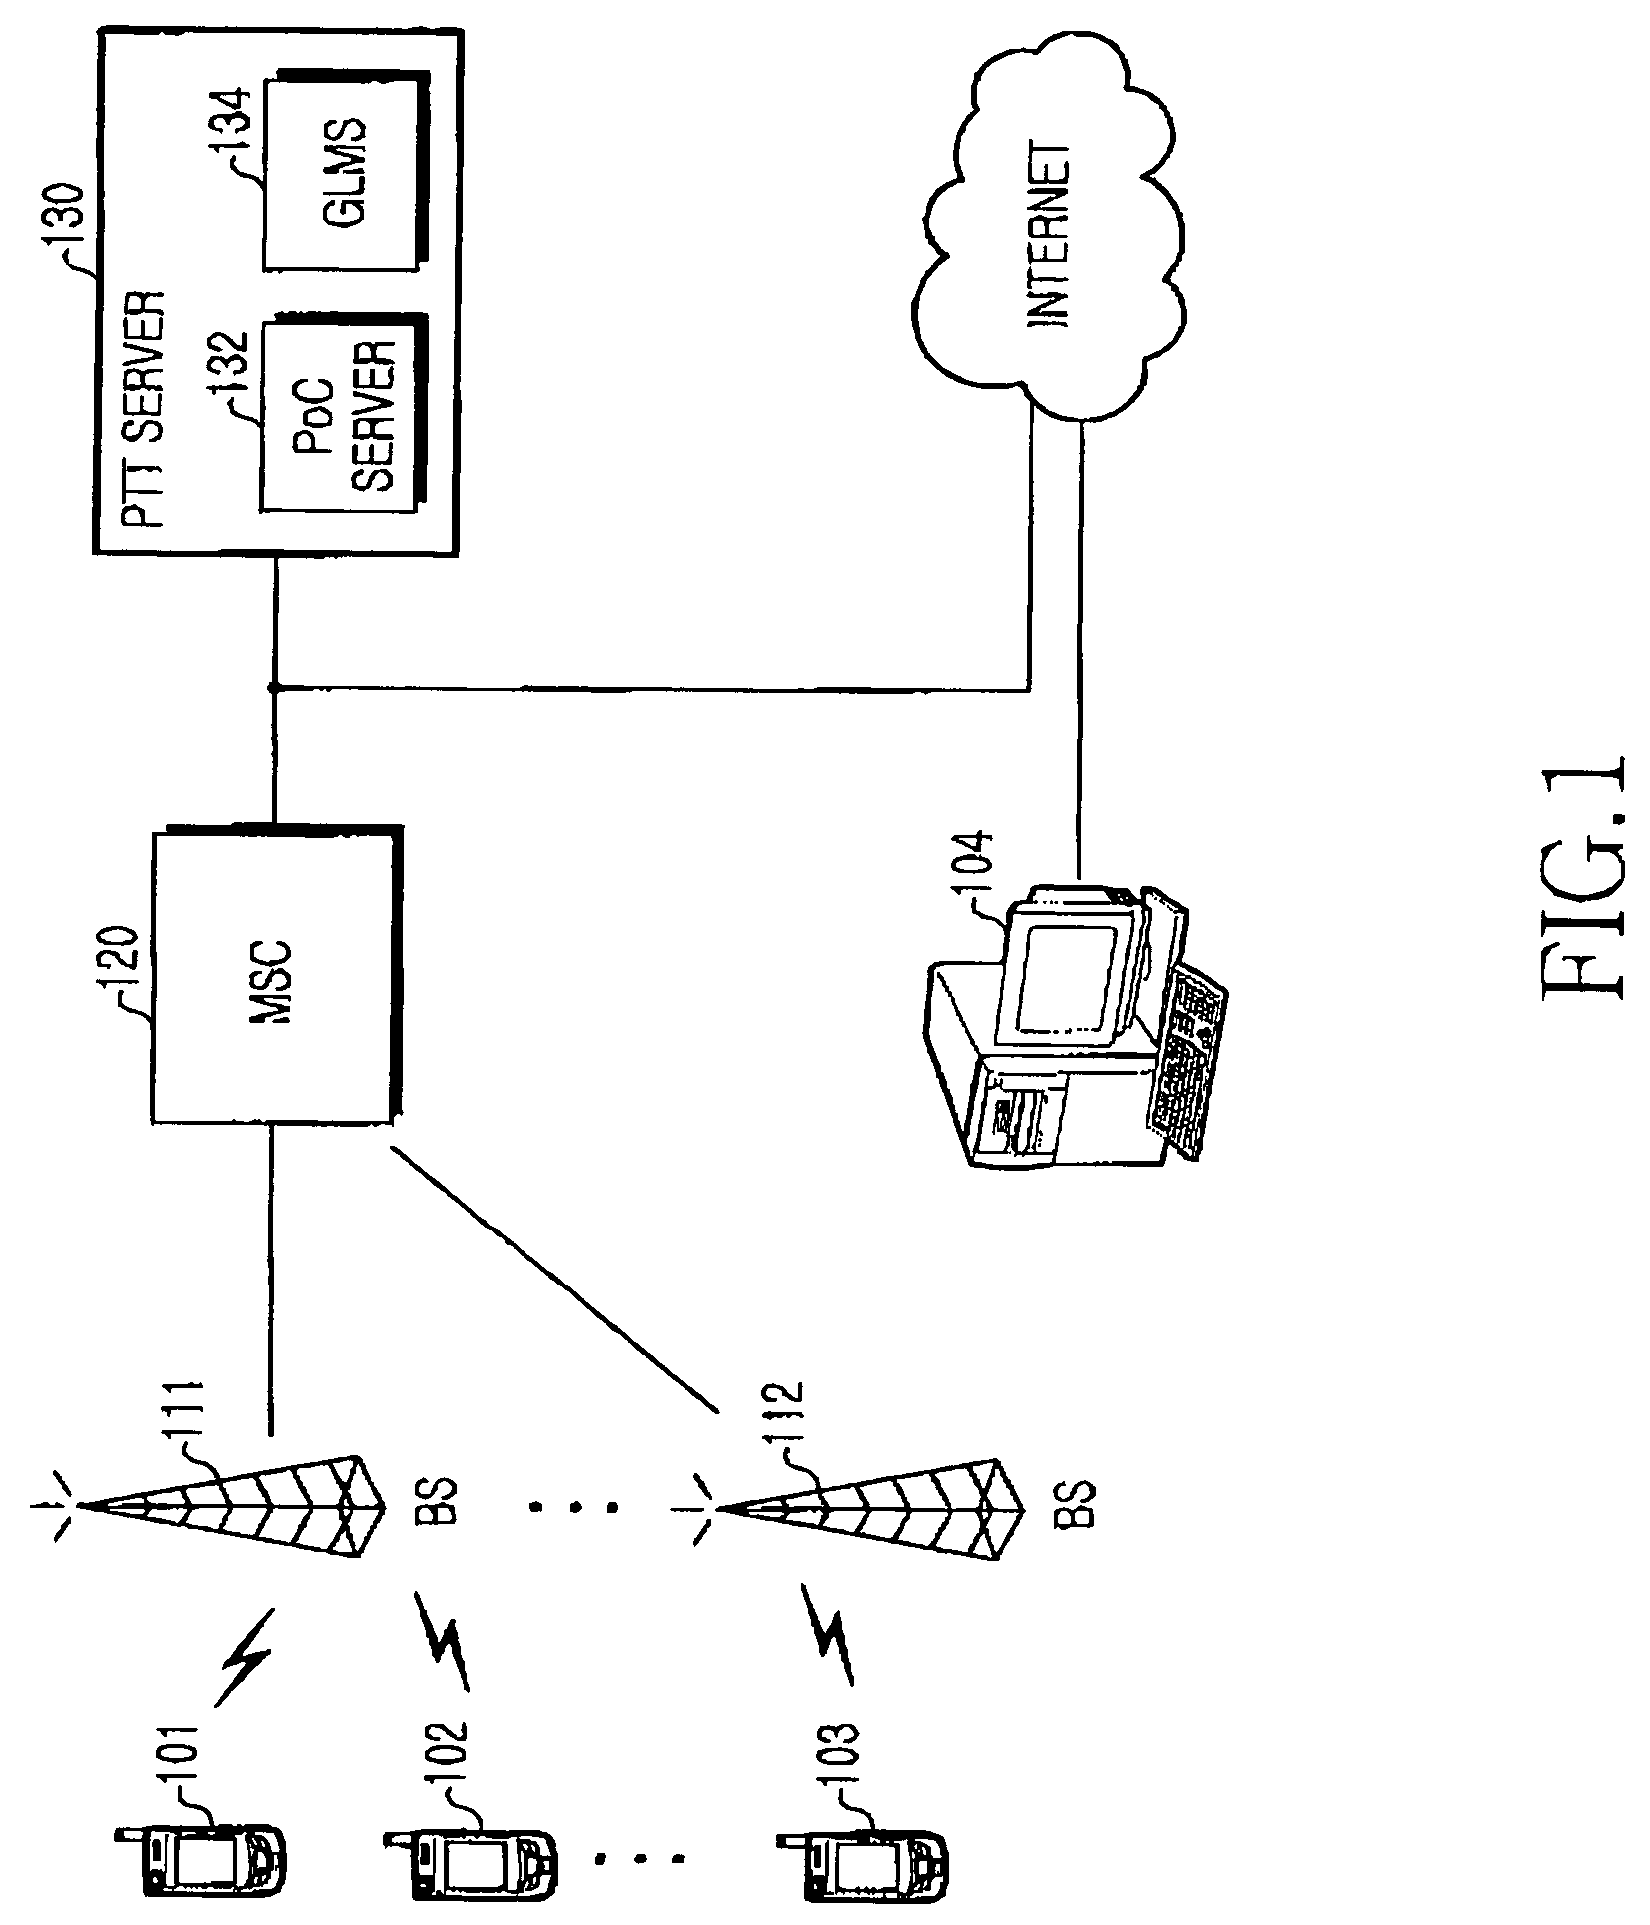 Method of communicating using a push to talk scheme in a mobile communication system